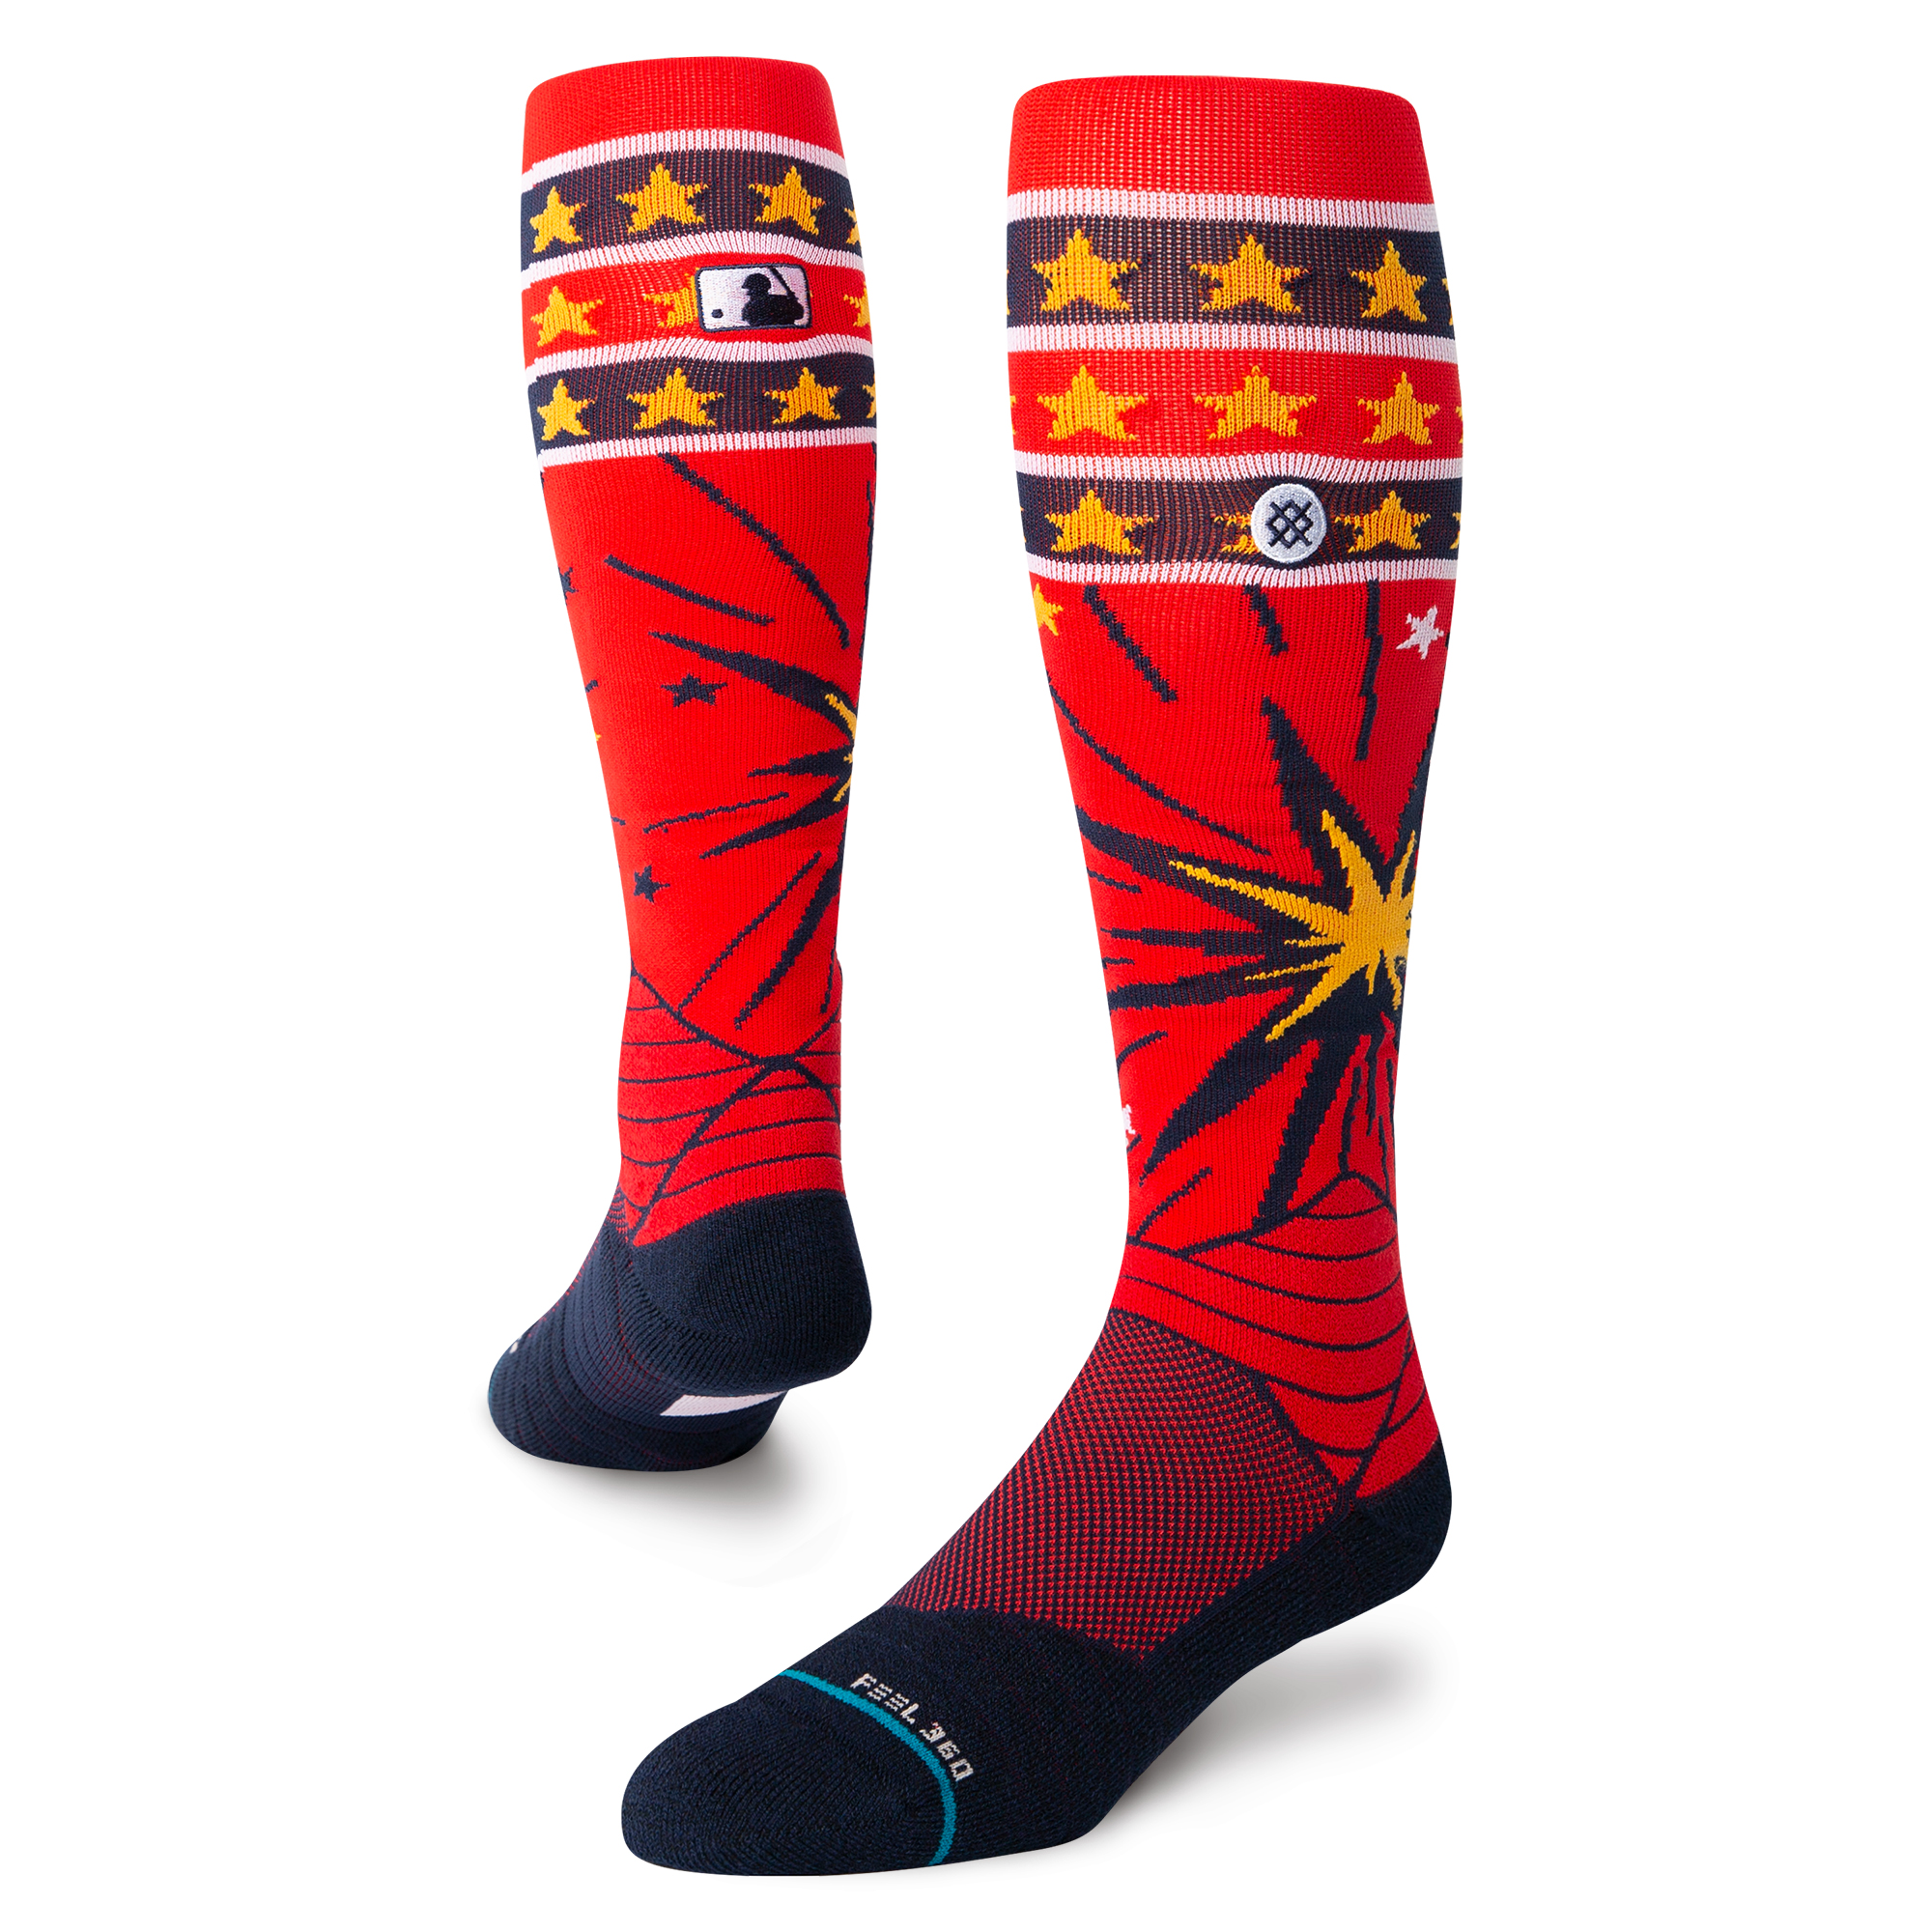 New Stance Fusion Socks To Debut At 2016 MLB All-Star Game - CBS